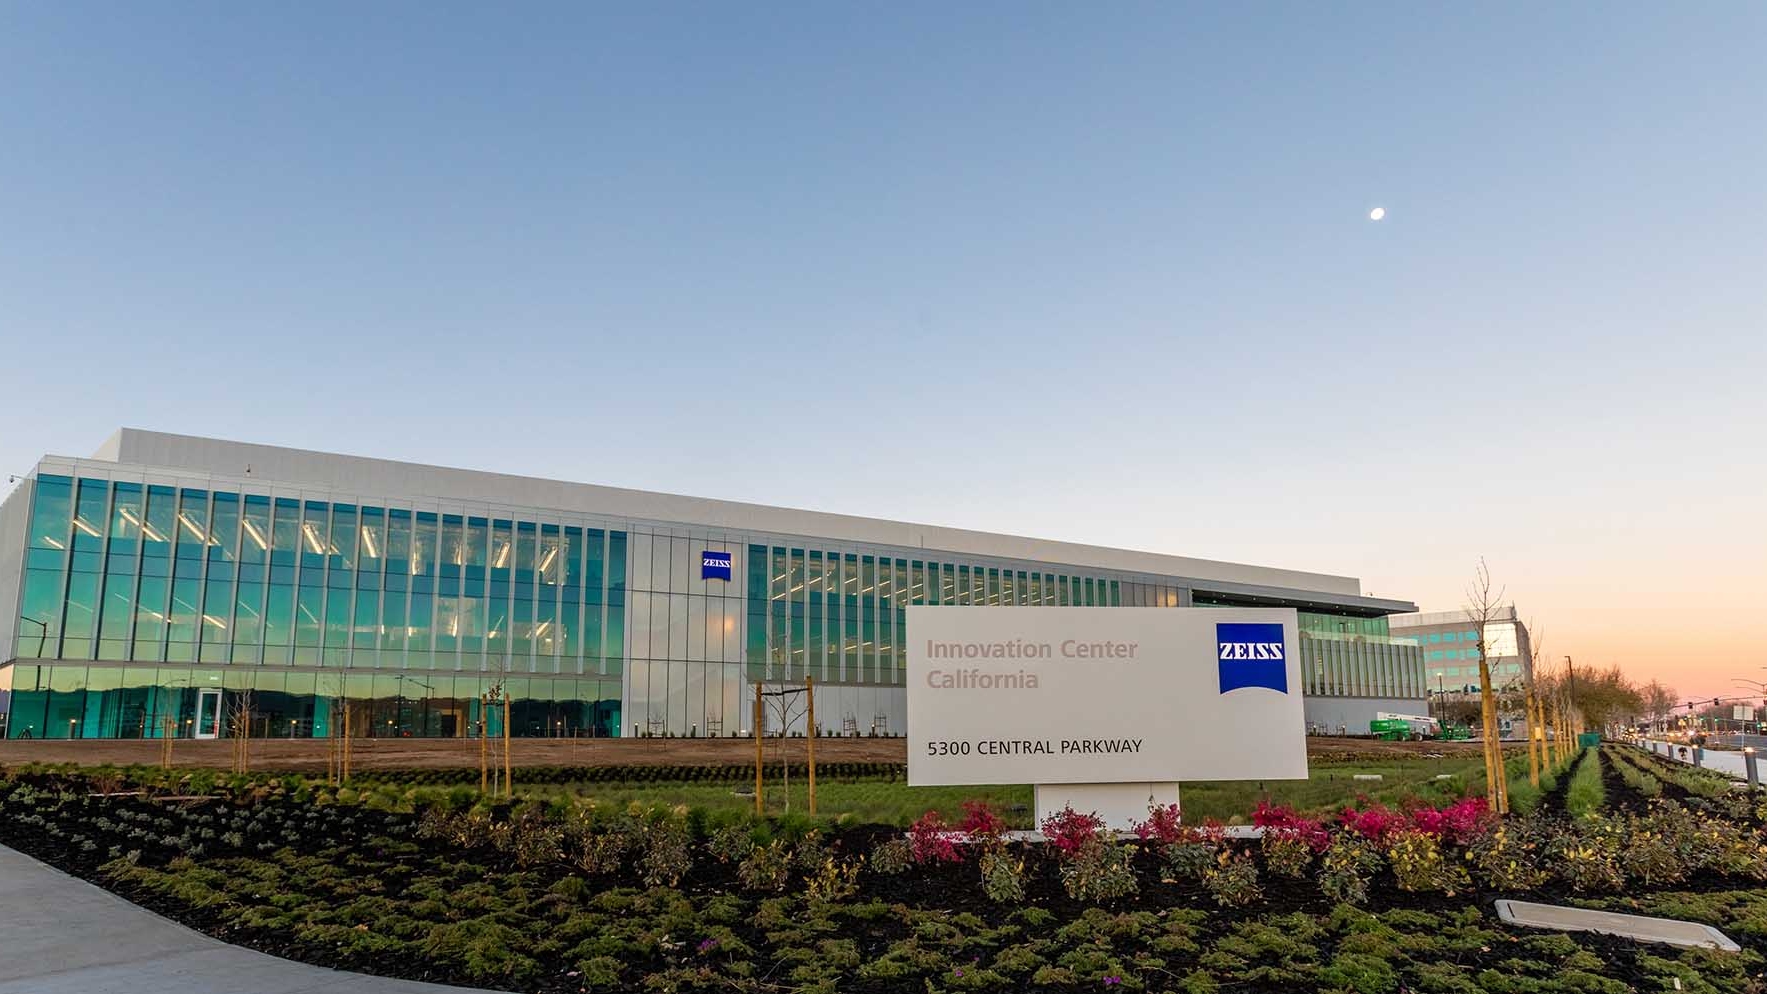 The Bay Area-based new ZEISS Innovation Center is designed to promote customer, science and employee collaborations.